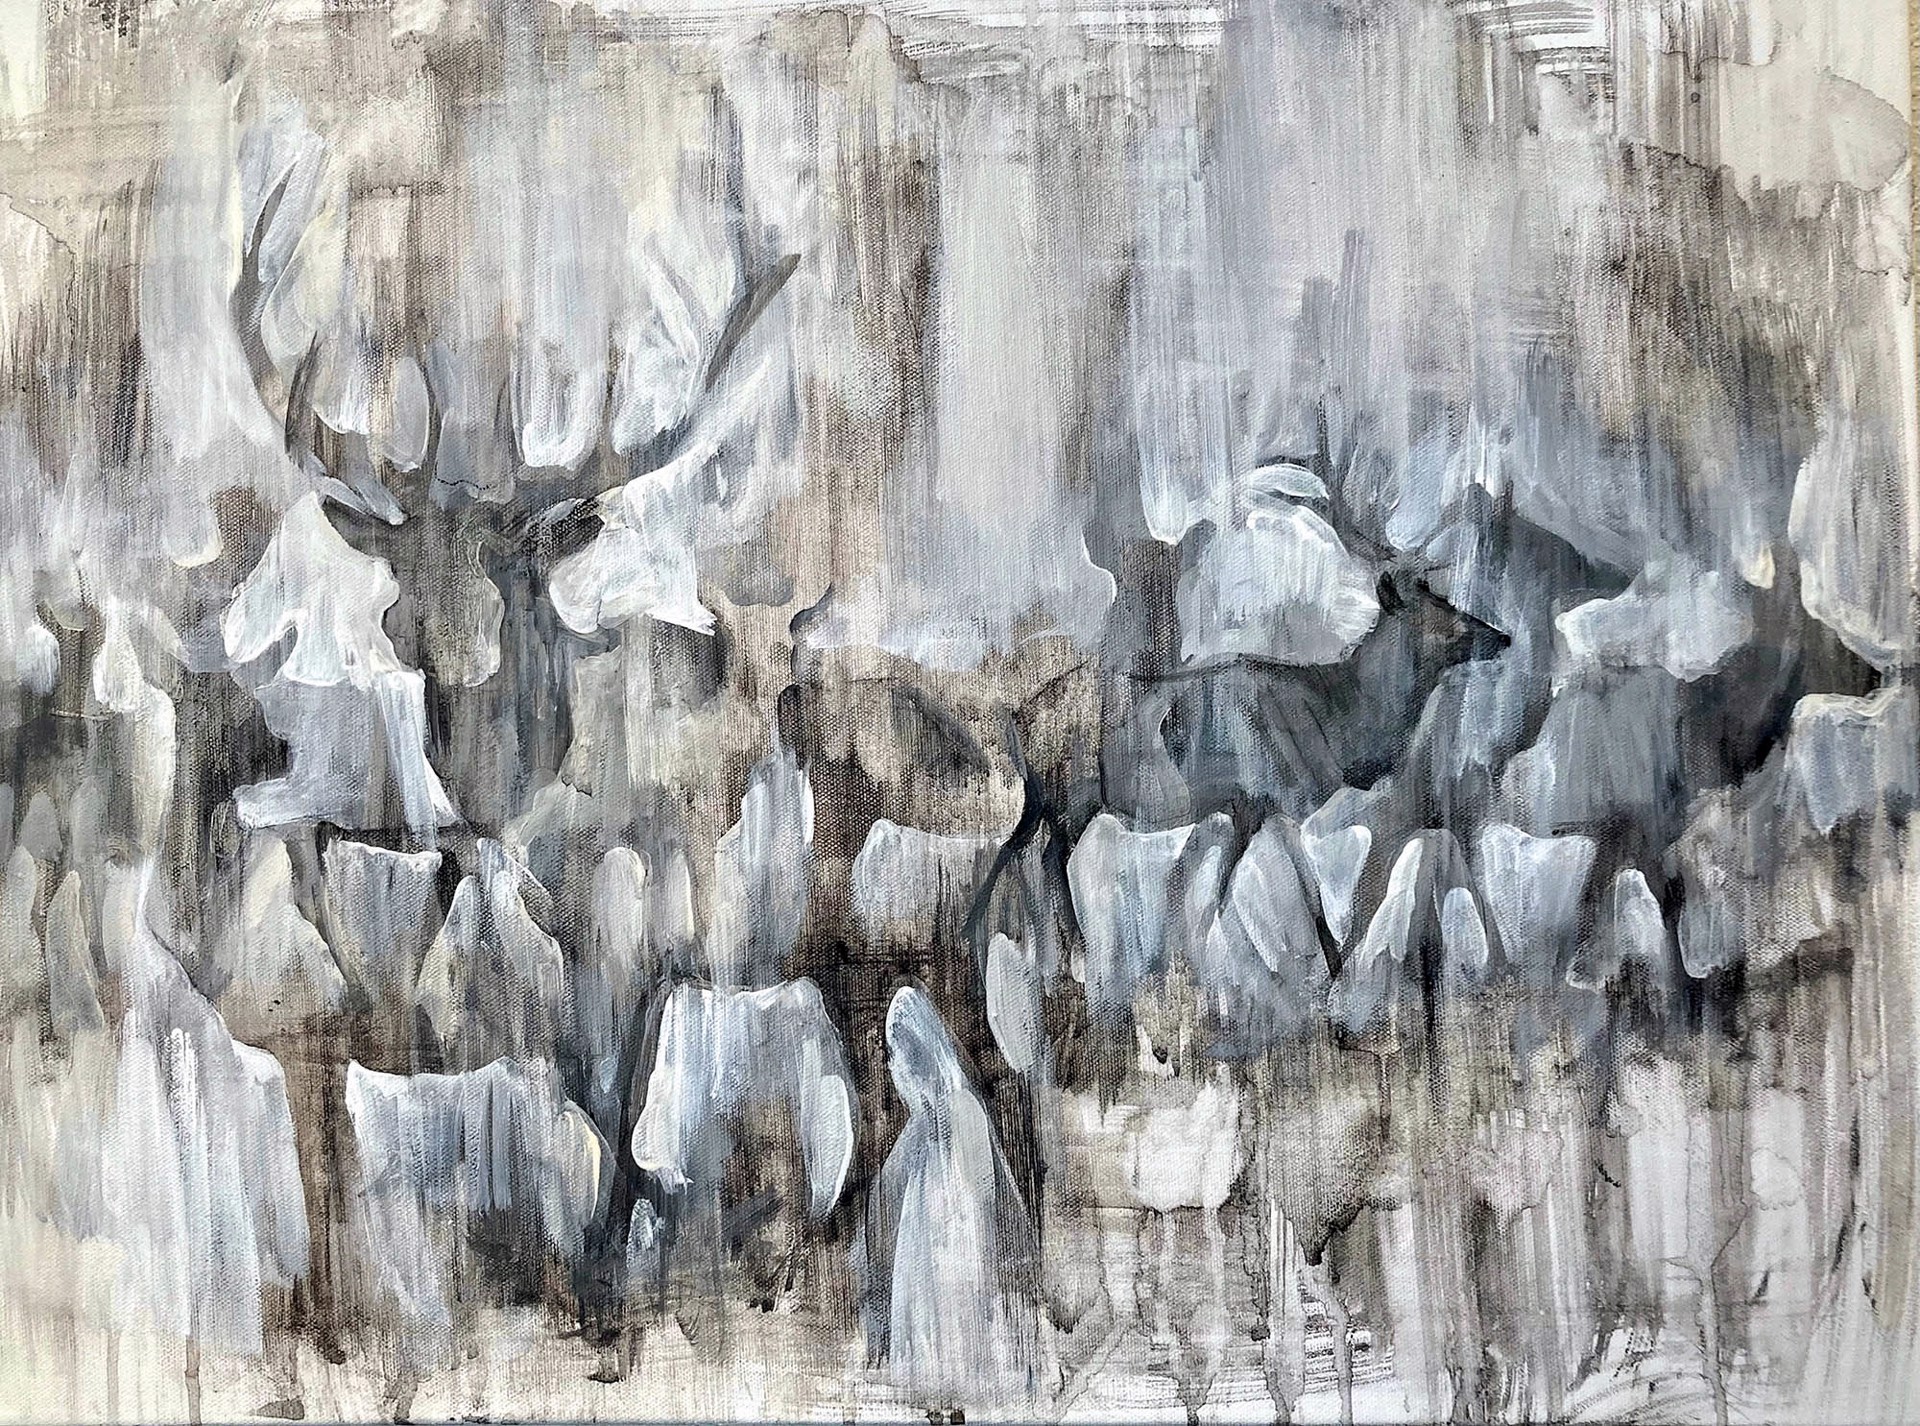 Original Acrylic Painting By Taryn Boals Featuring A Herd Of Elk In Shadows And Overlays In Black And White